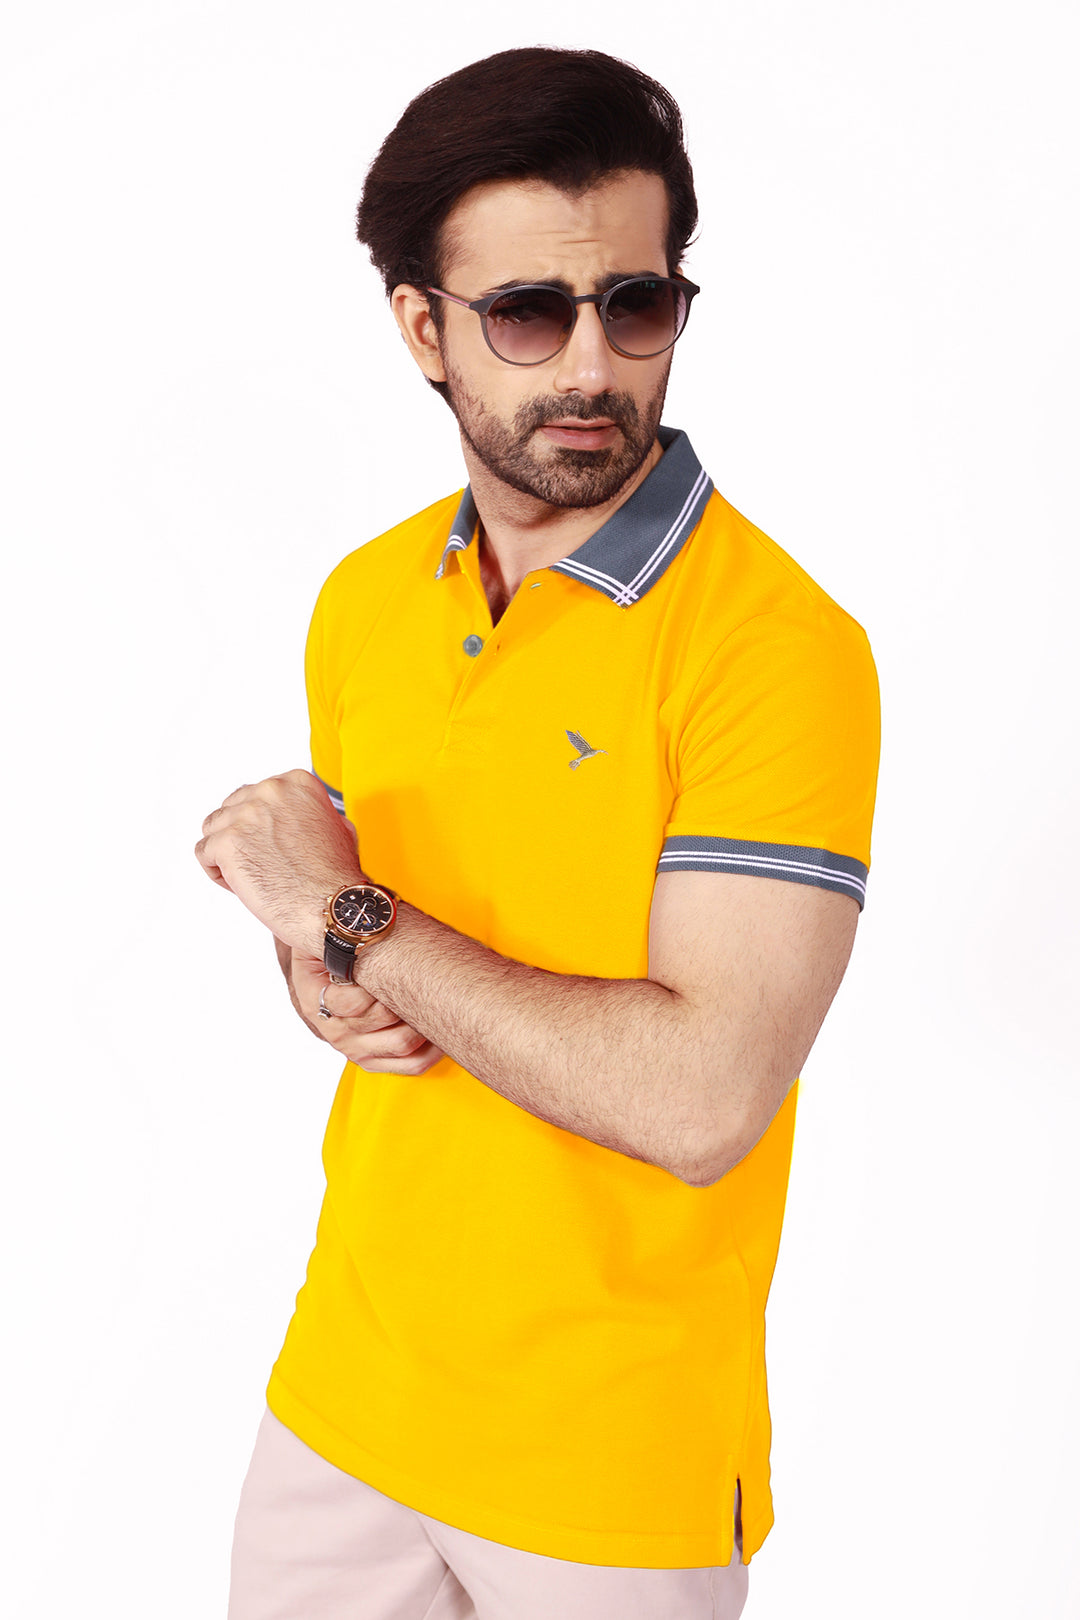 Embroidered Polo Shirt Online Pakistan